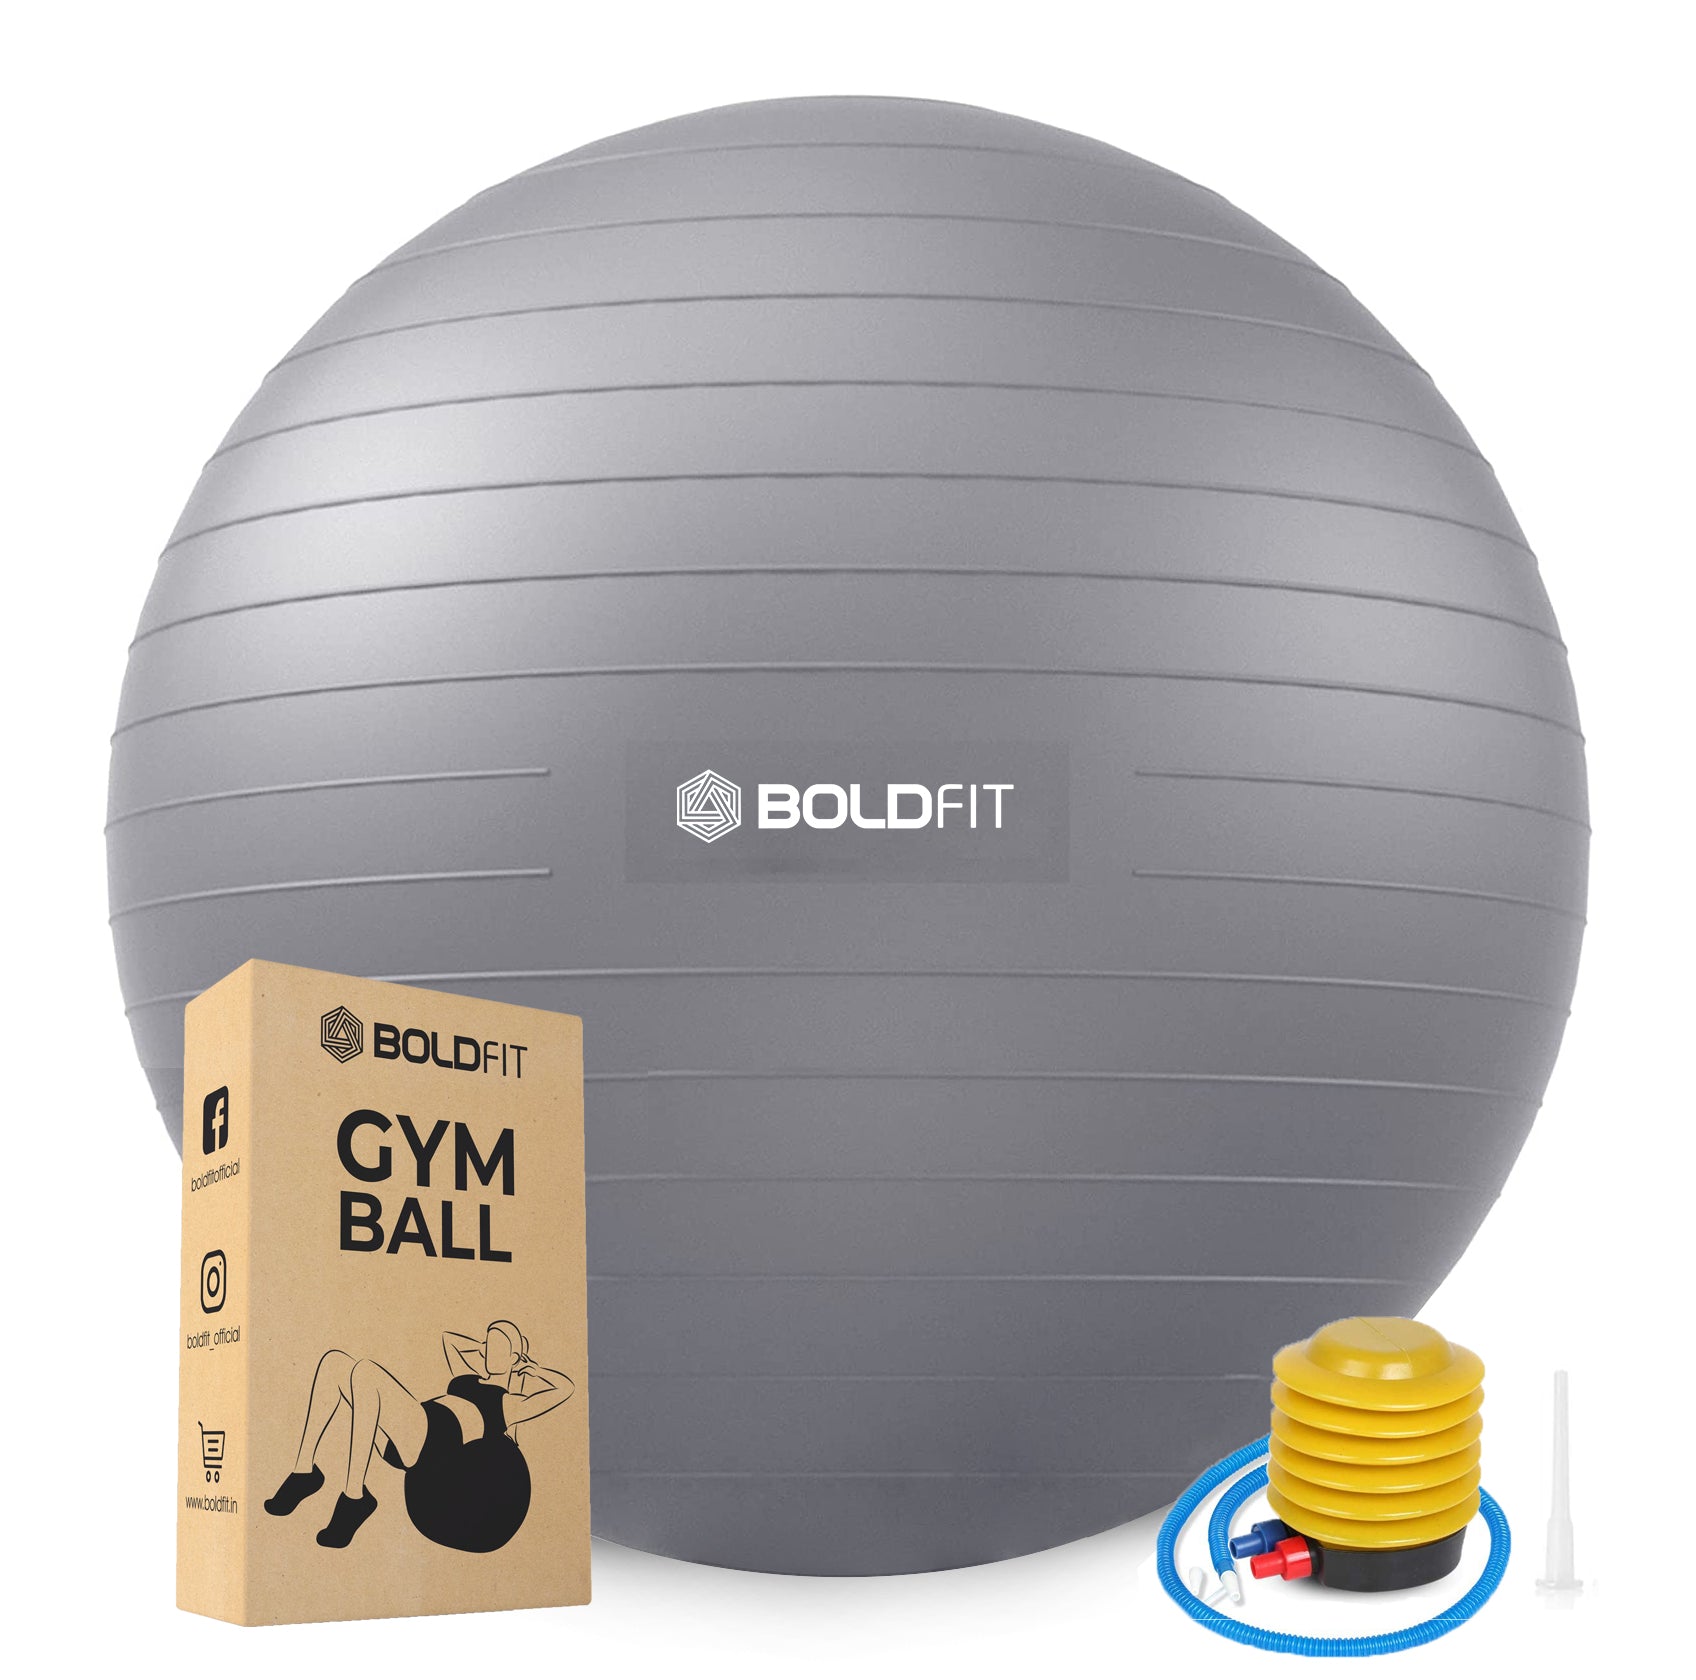 Boldfit Gym Ball for Exercise & Yoga with Pump - BoldFit